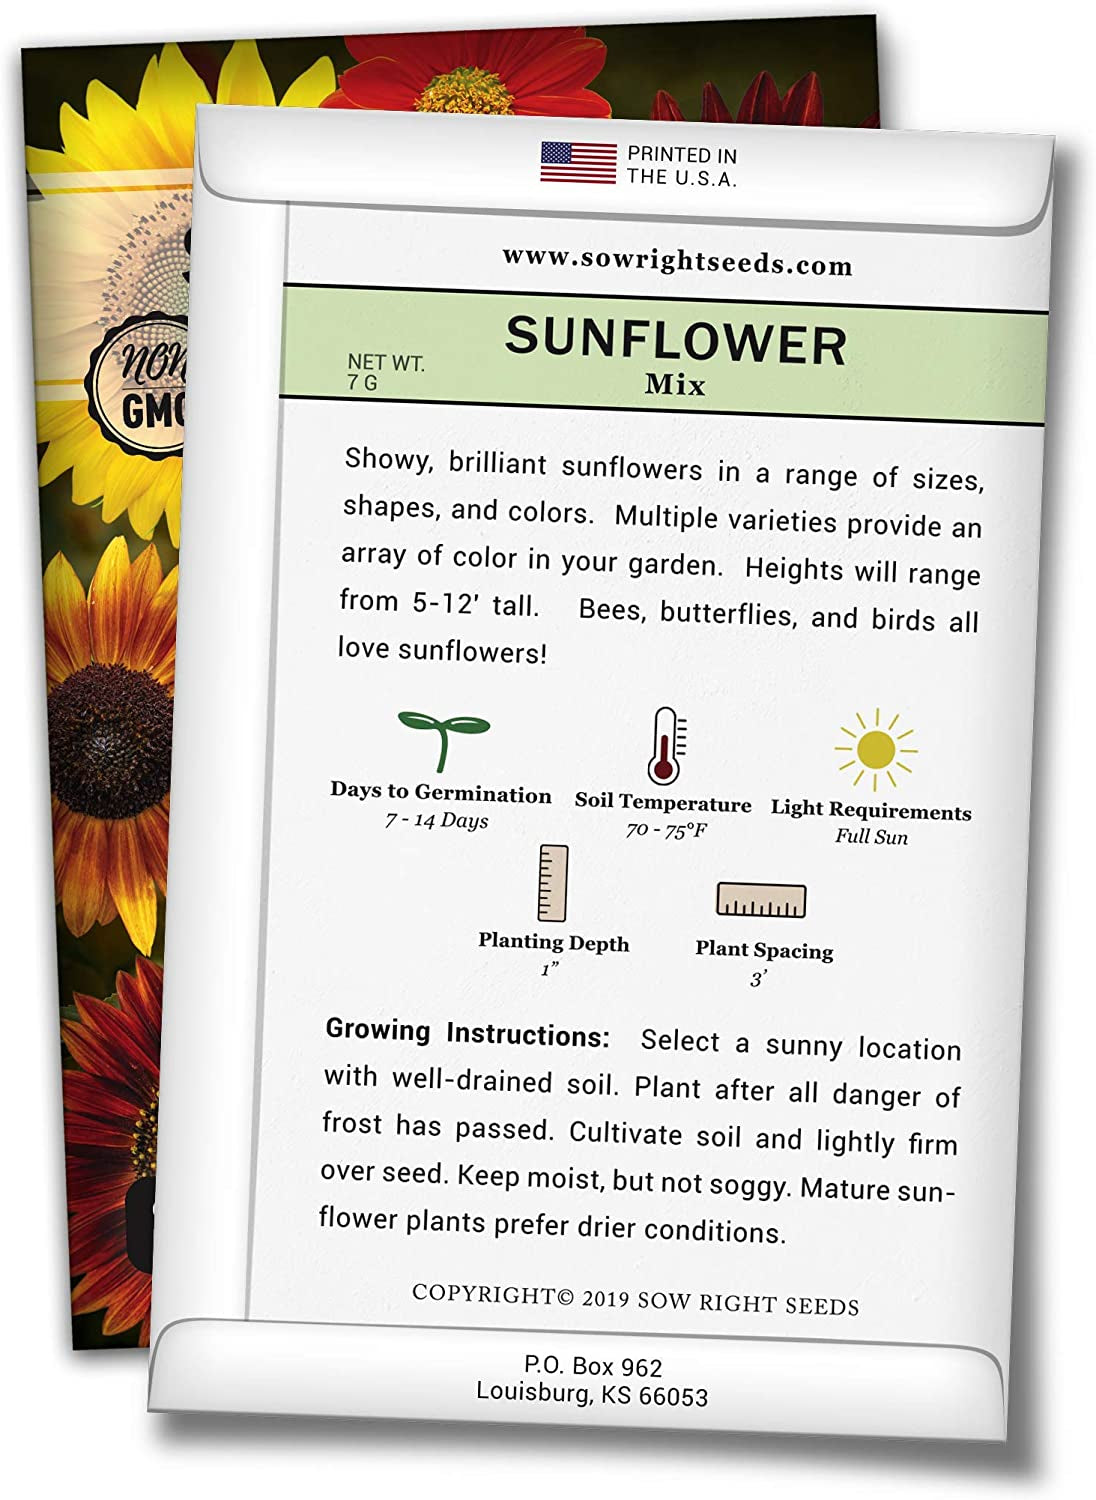 - Mixed Sunflower Seeds for Planting - Non-Gmo Heirloom Packet with Instructions - Great Wedding or Party Favor - Grow Giant Sunflowers in an Assortment of Bright, Unique Colors(1)